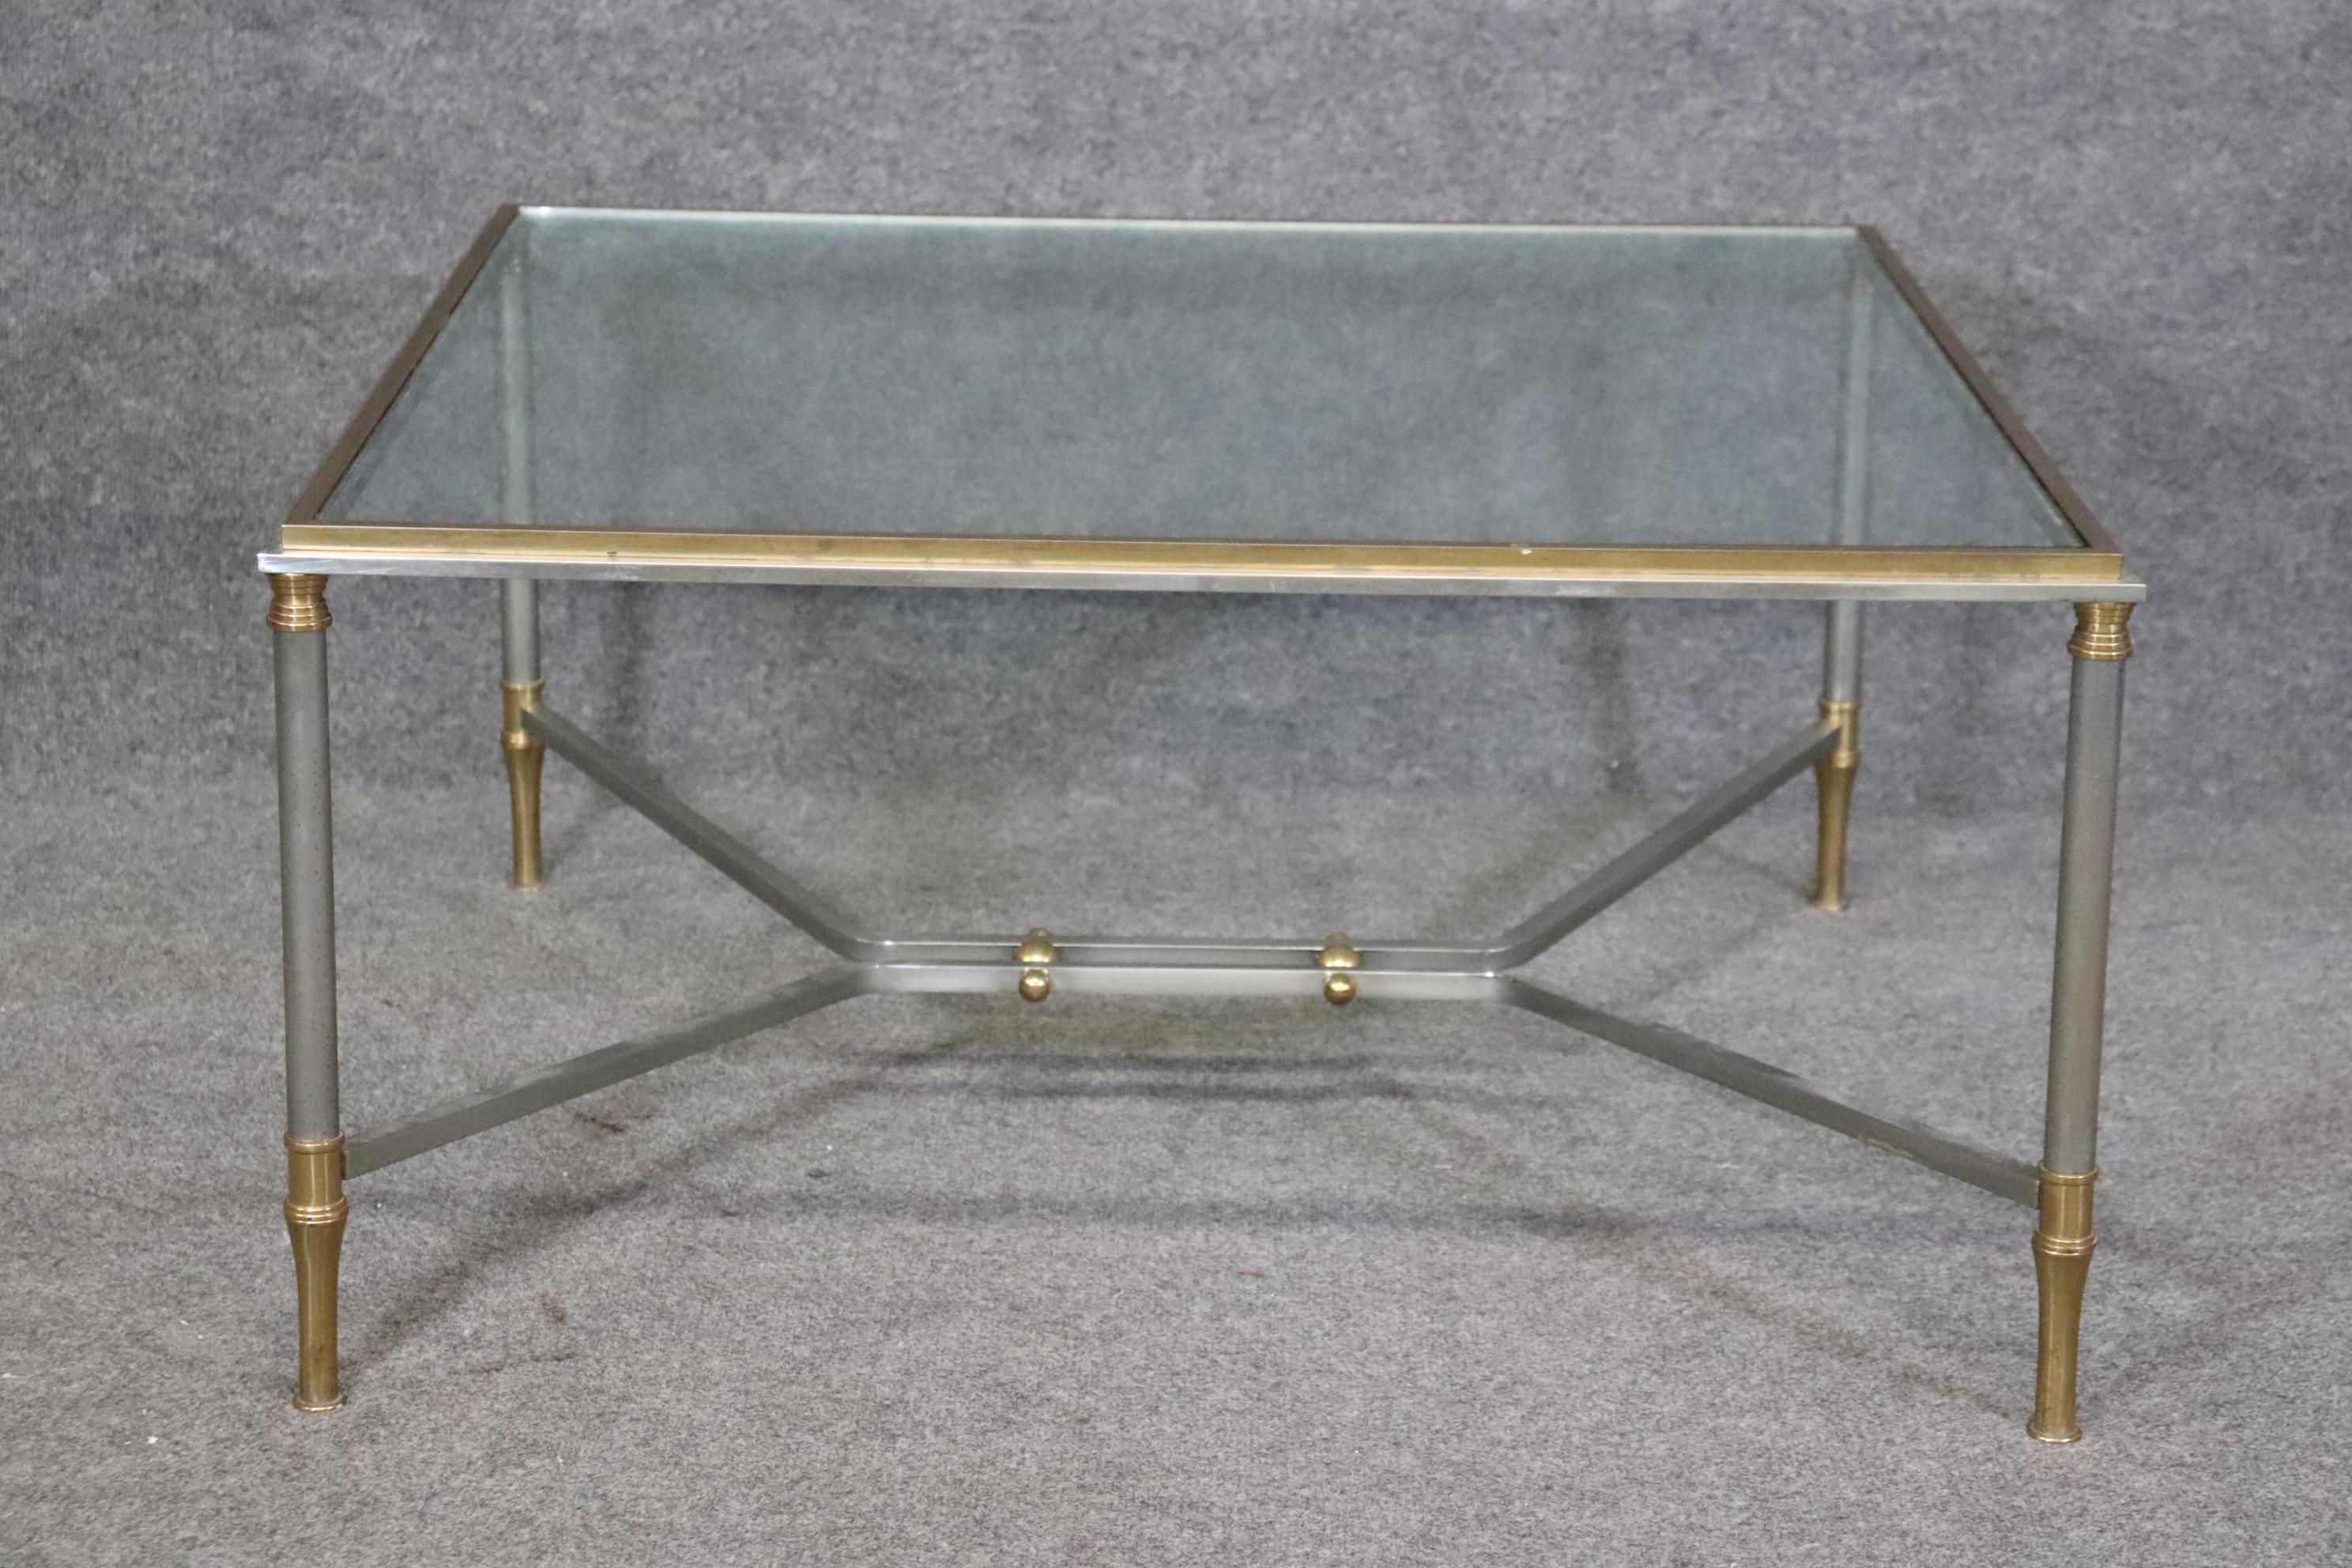 Dimensions: Height: 18 1/4 in Width: 36 in Depth: 36 1/4 in 


This Maison Jansen French Directoire style glass top coffee table is of the highest quality! Maison Jansen made some of the world's most chic furniture and designed to replicate the